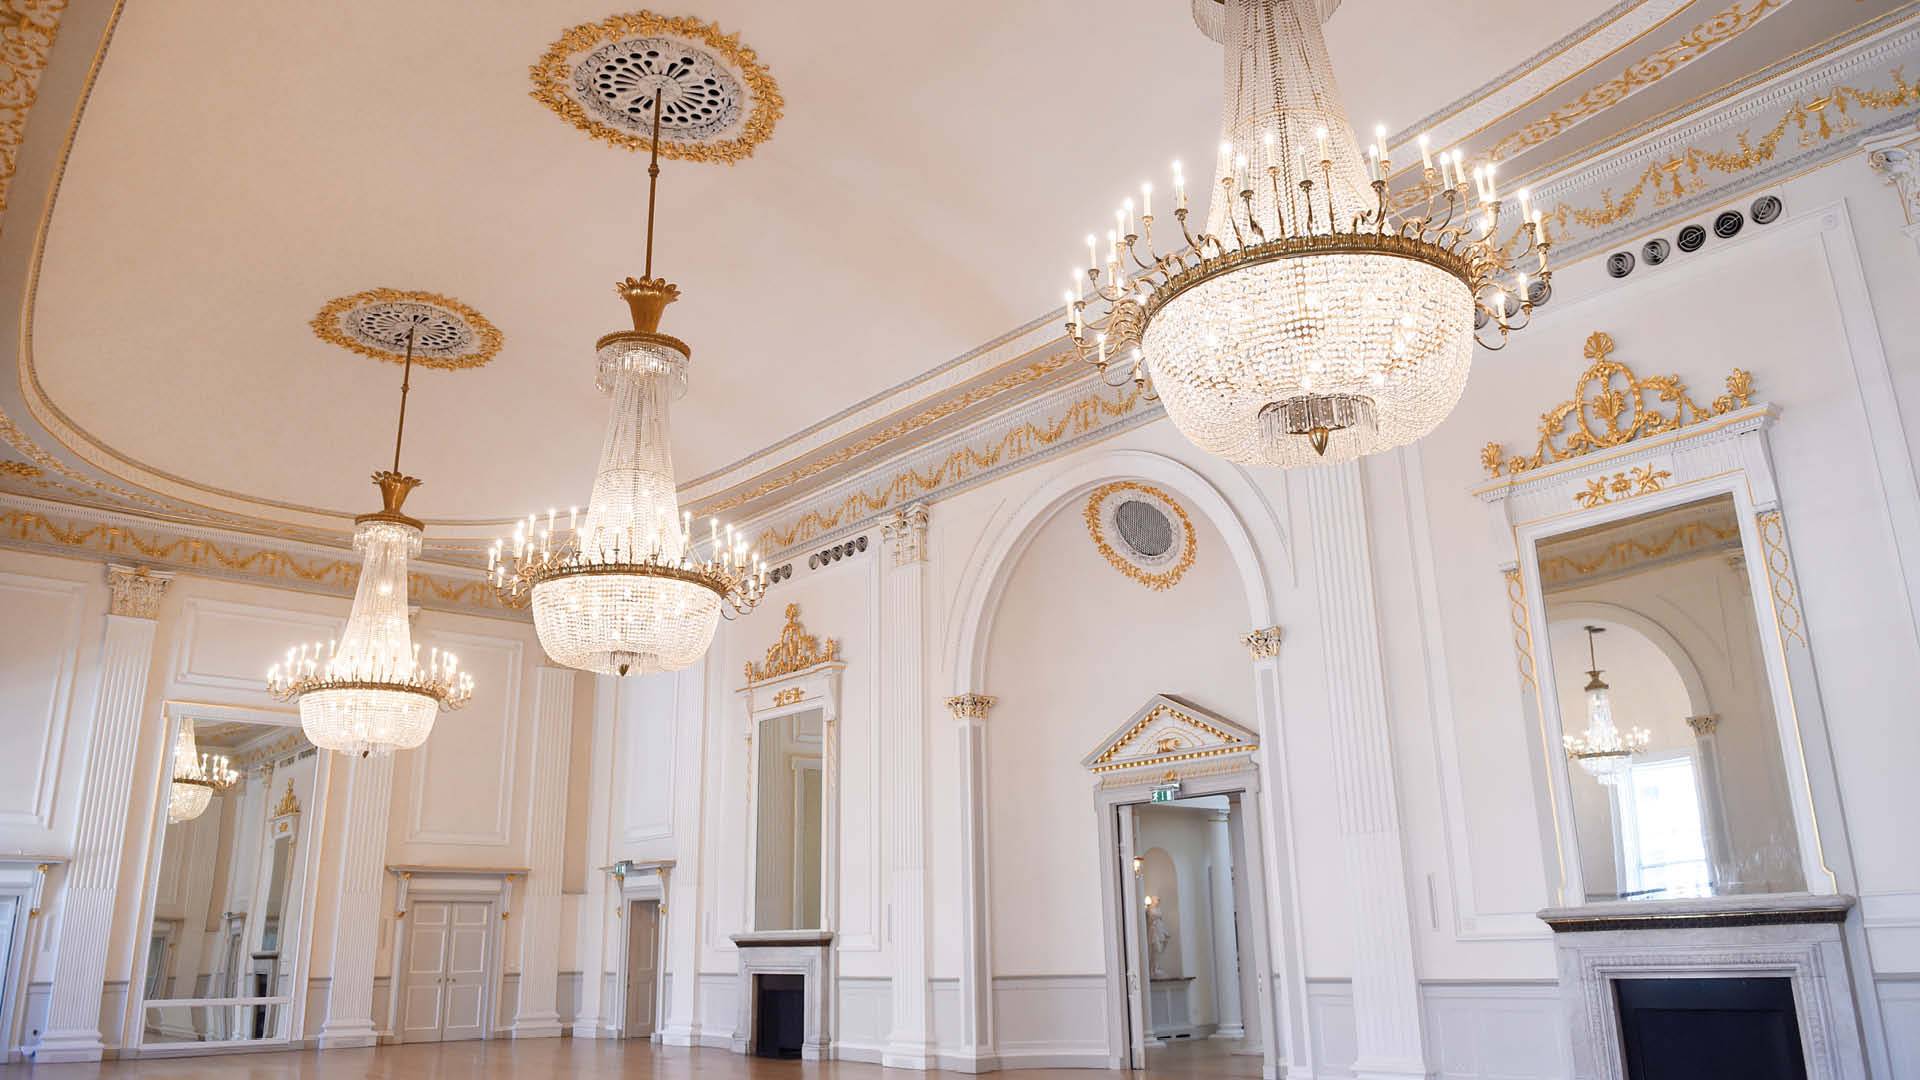 The ballroom in Assembly Rooms